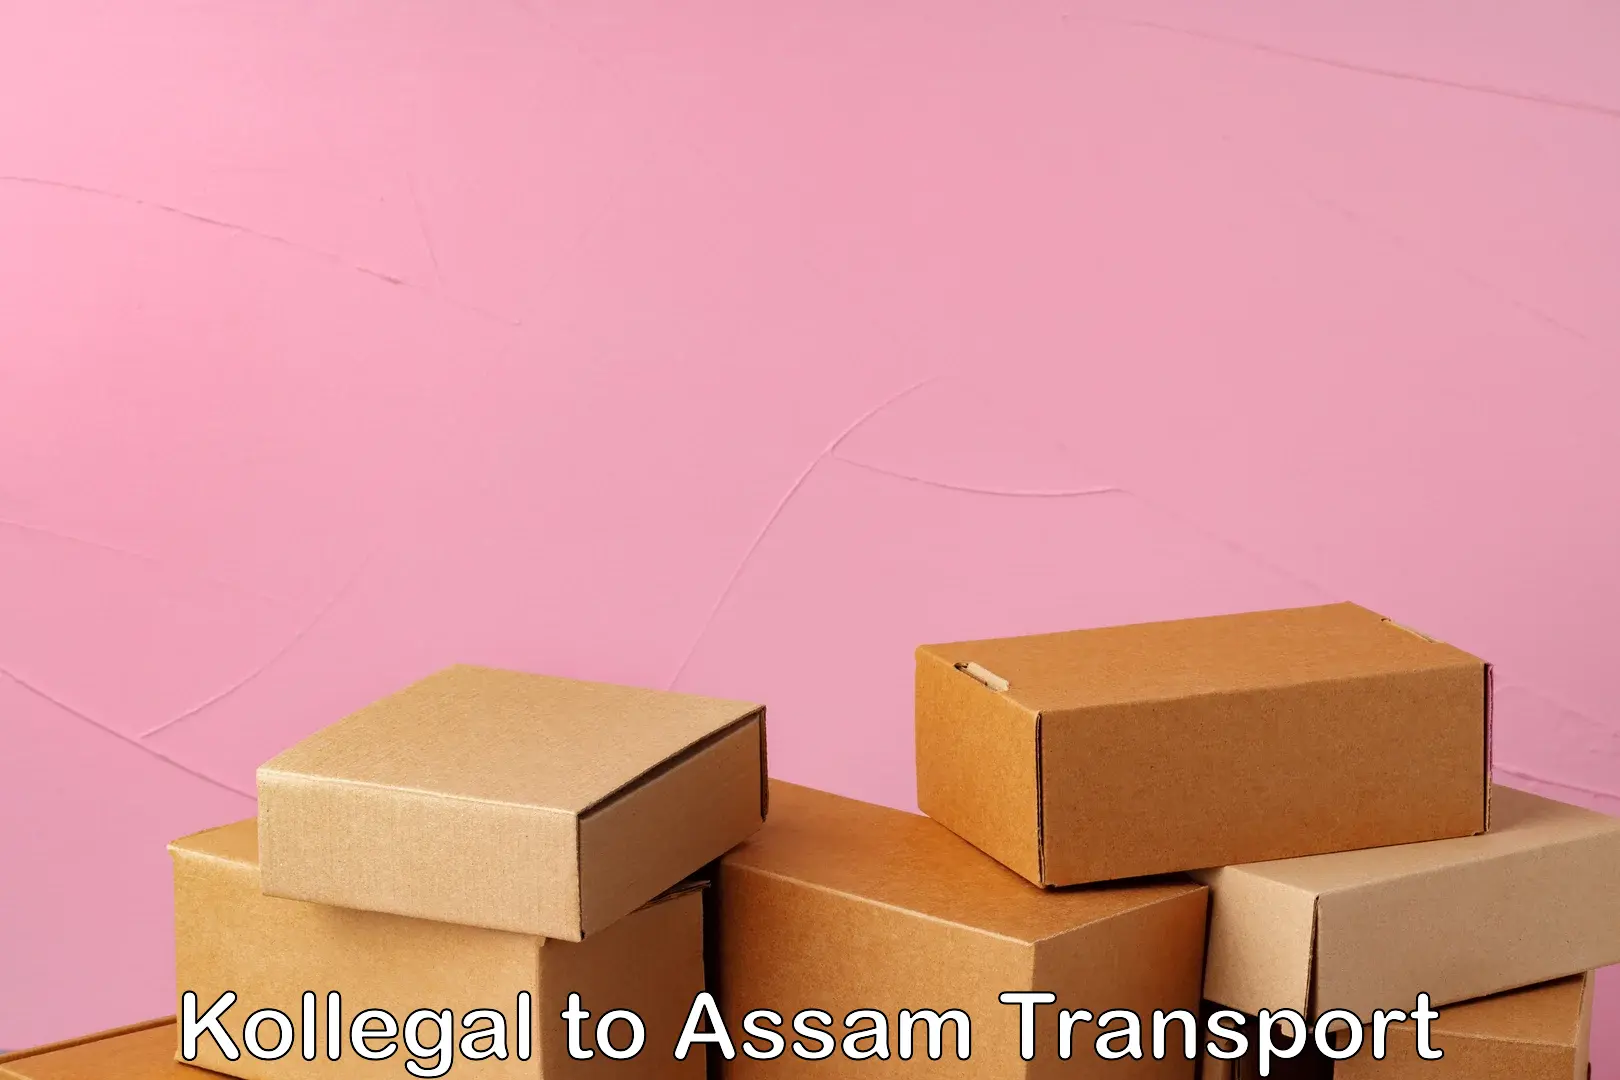 Vehicle parcel service Kollegal to Assam